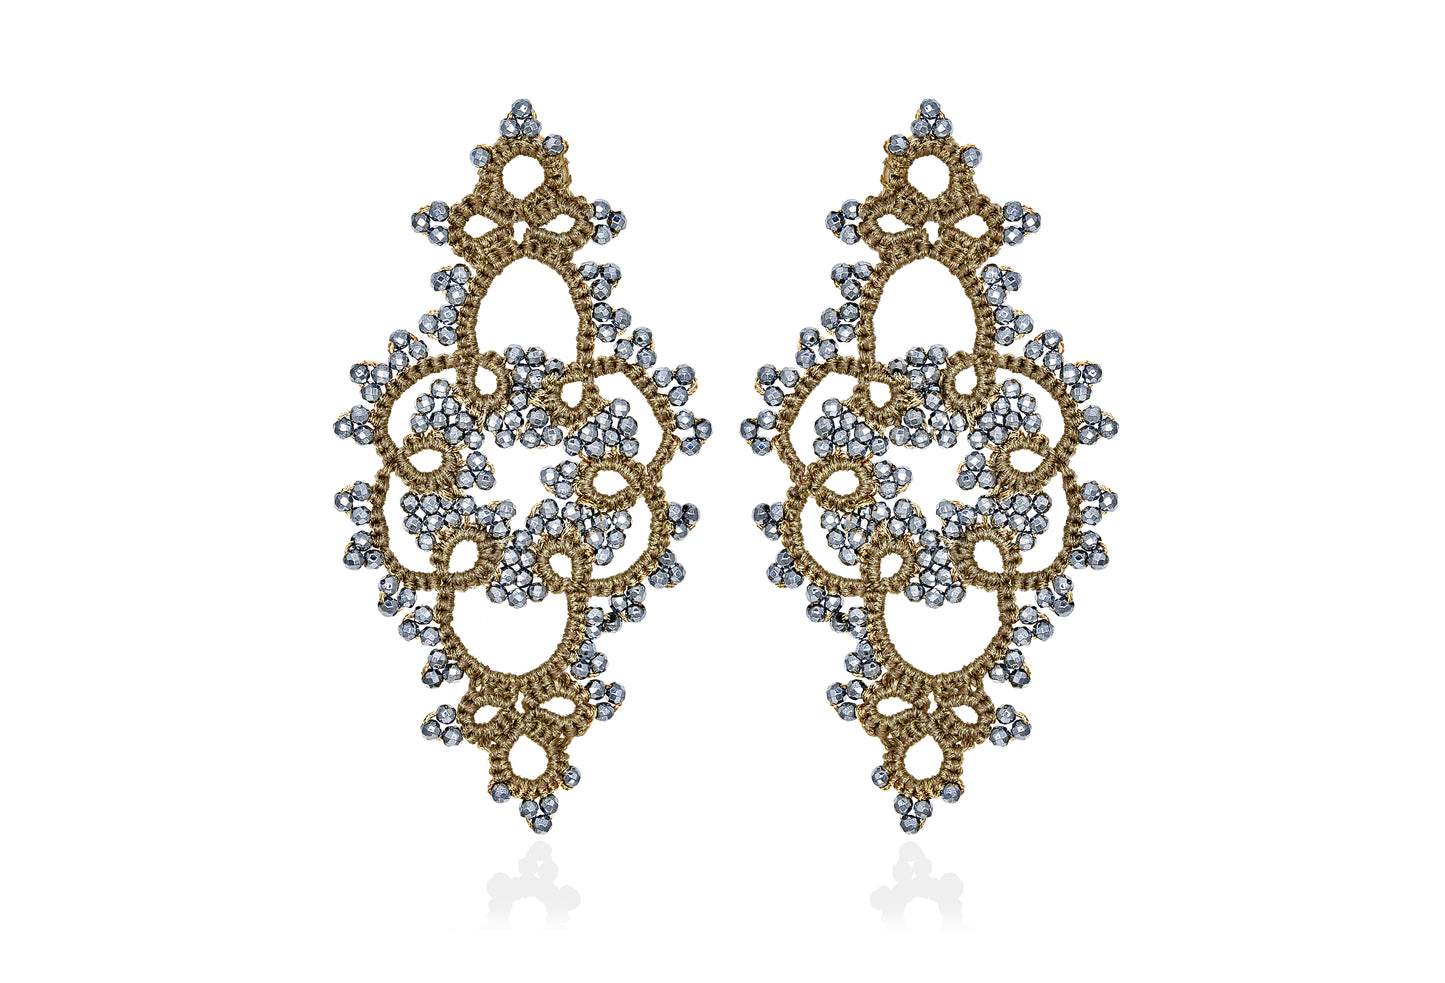 Sophie lace earrings, sand silver